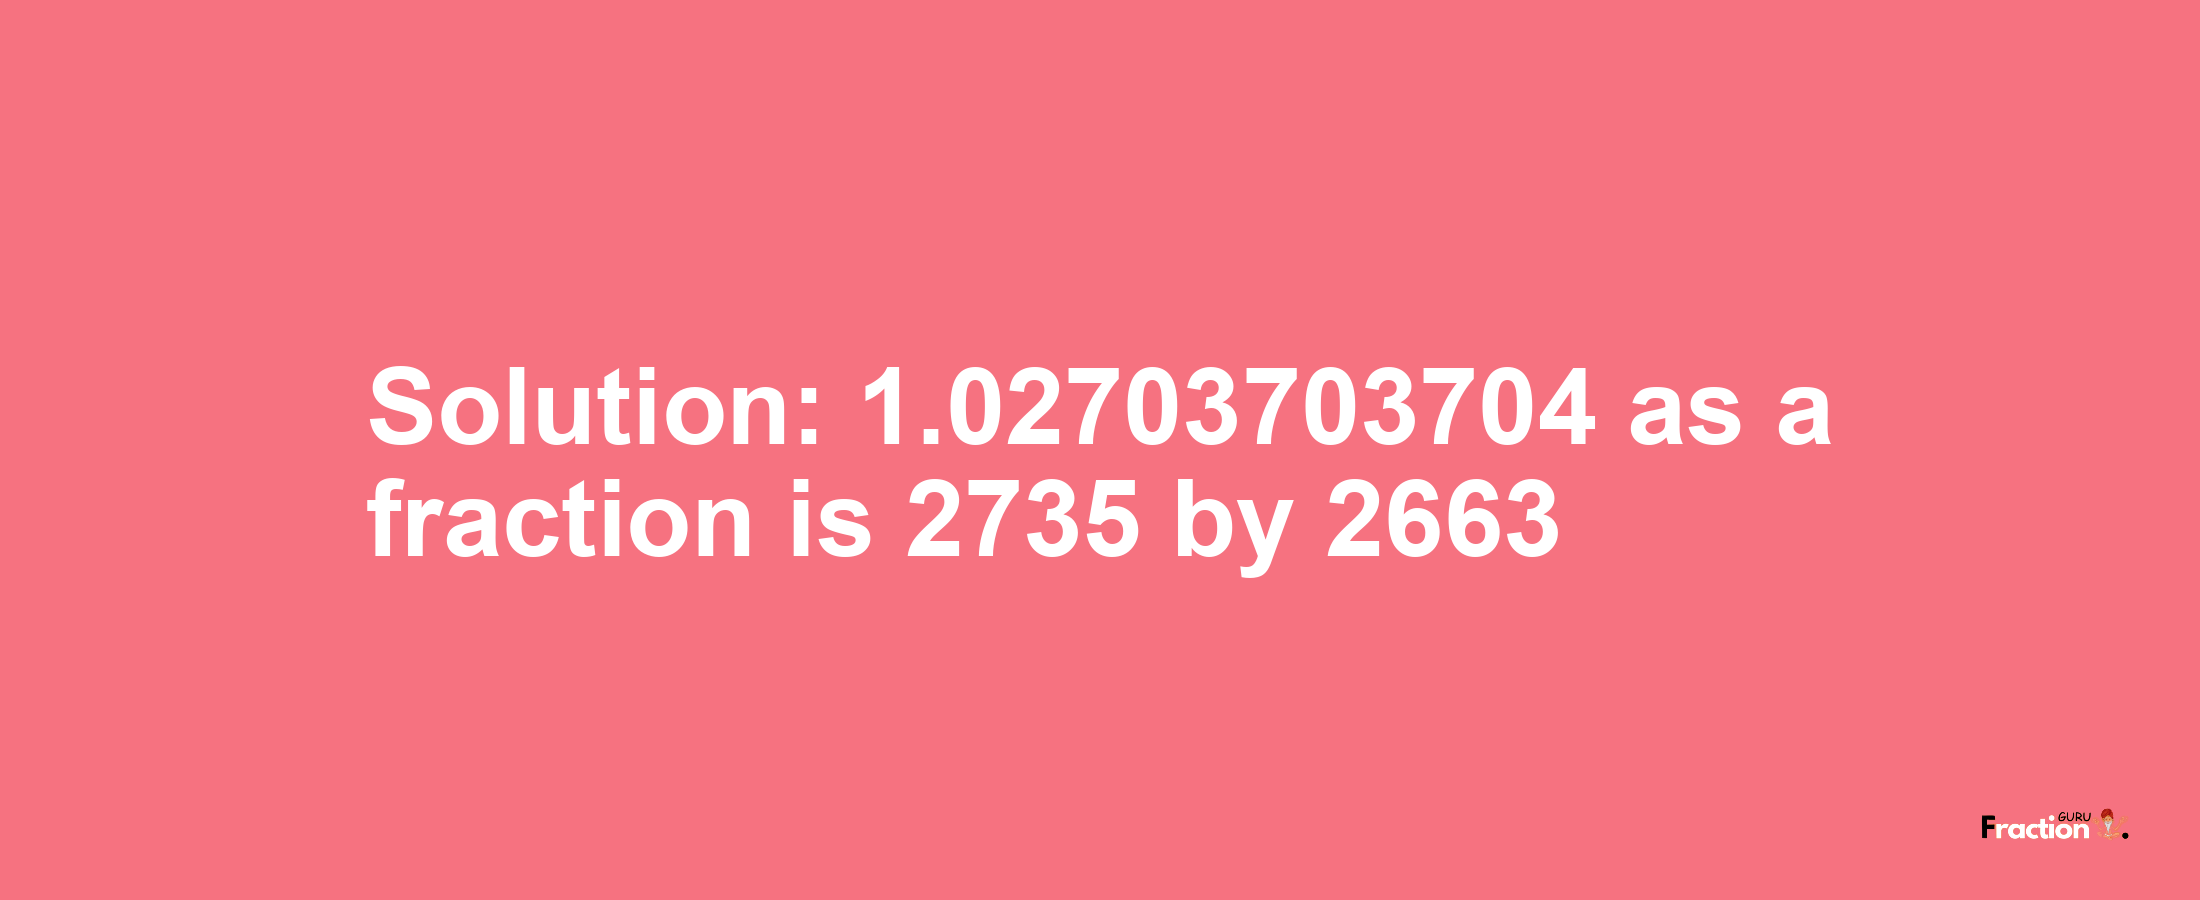 Solution:1.02703703704 as a fraction is 2735/2663